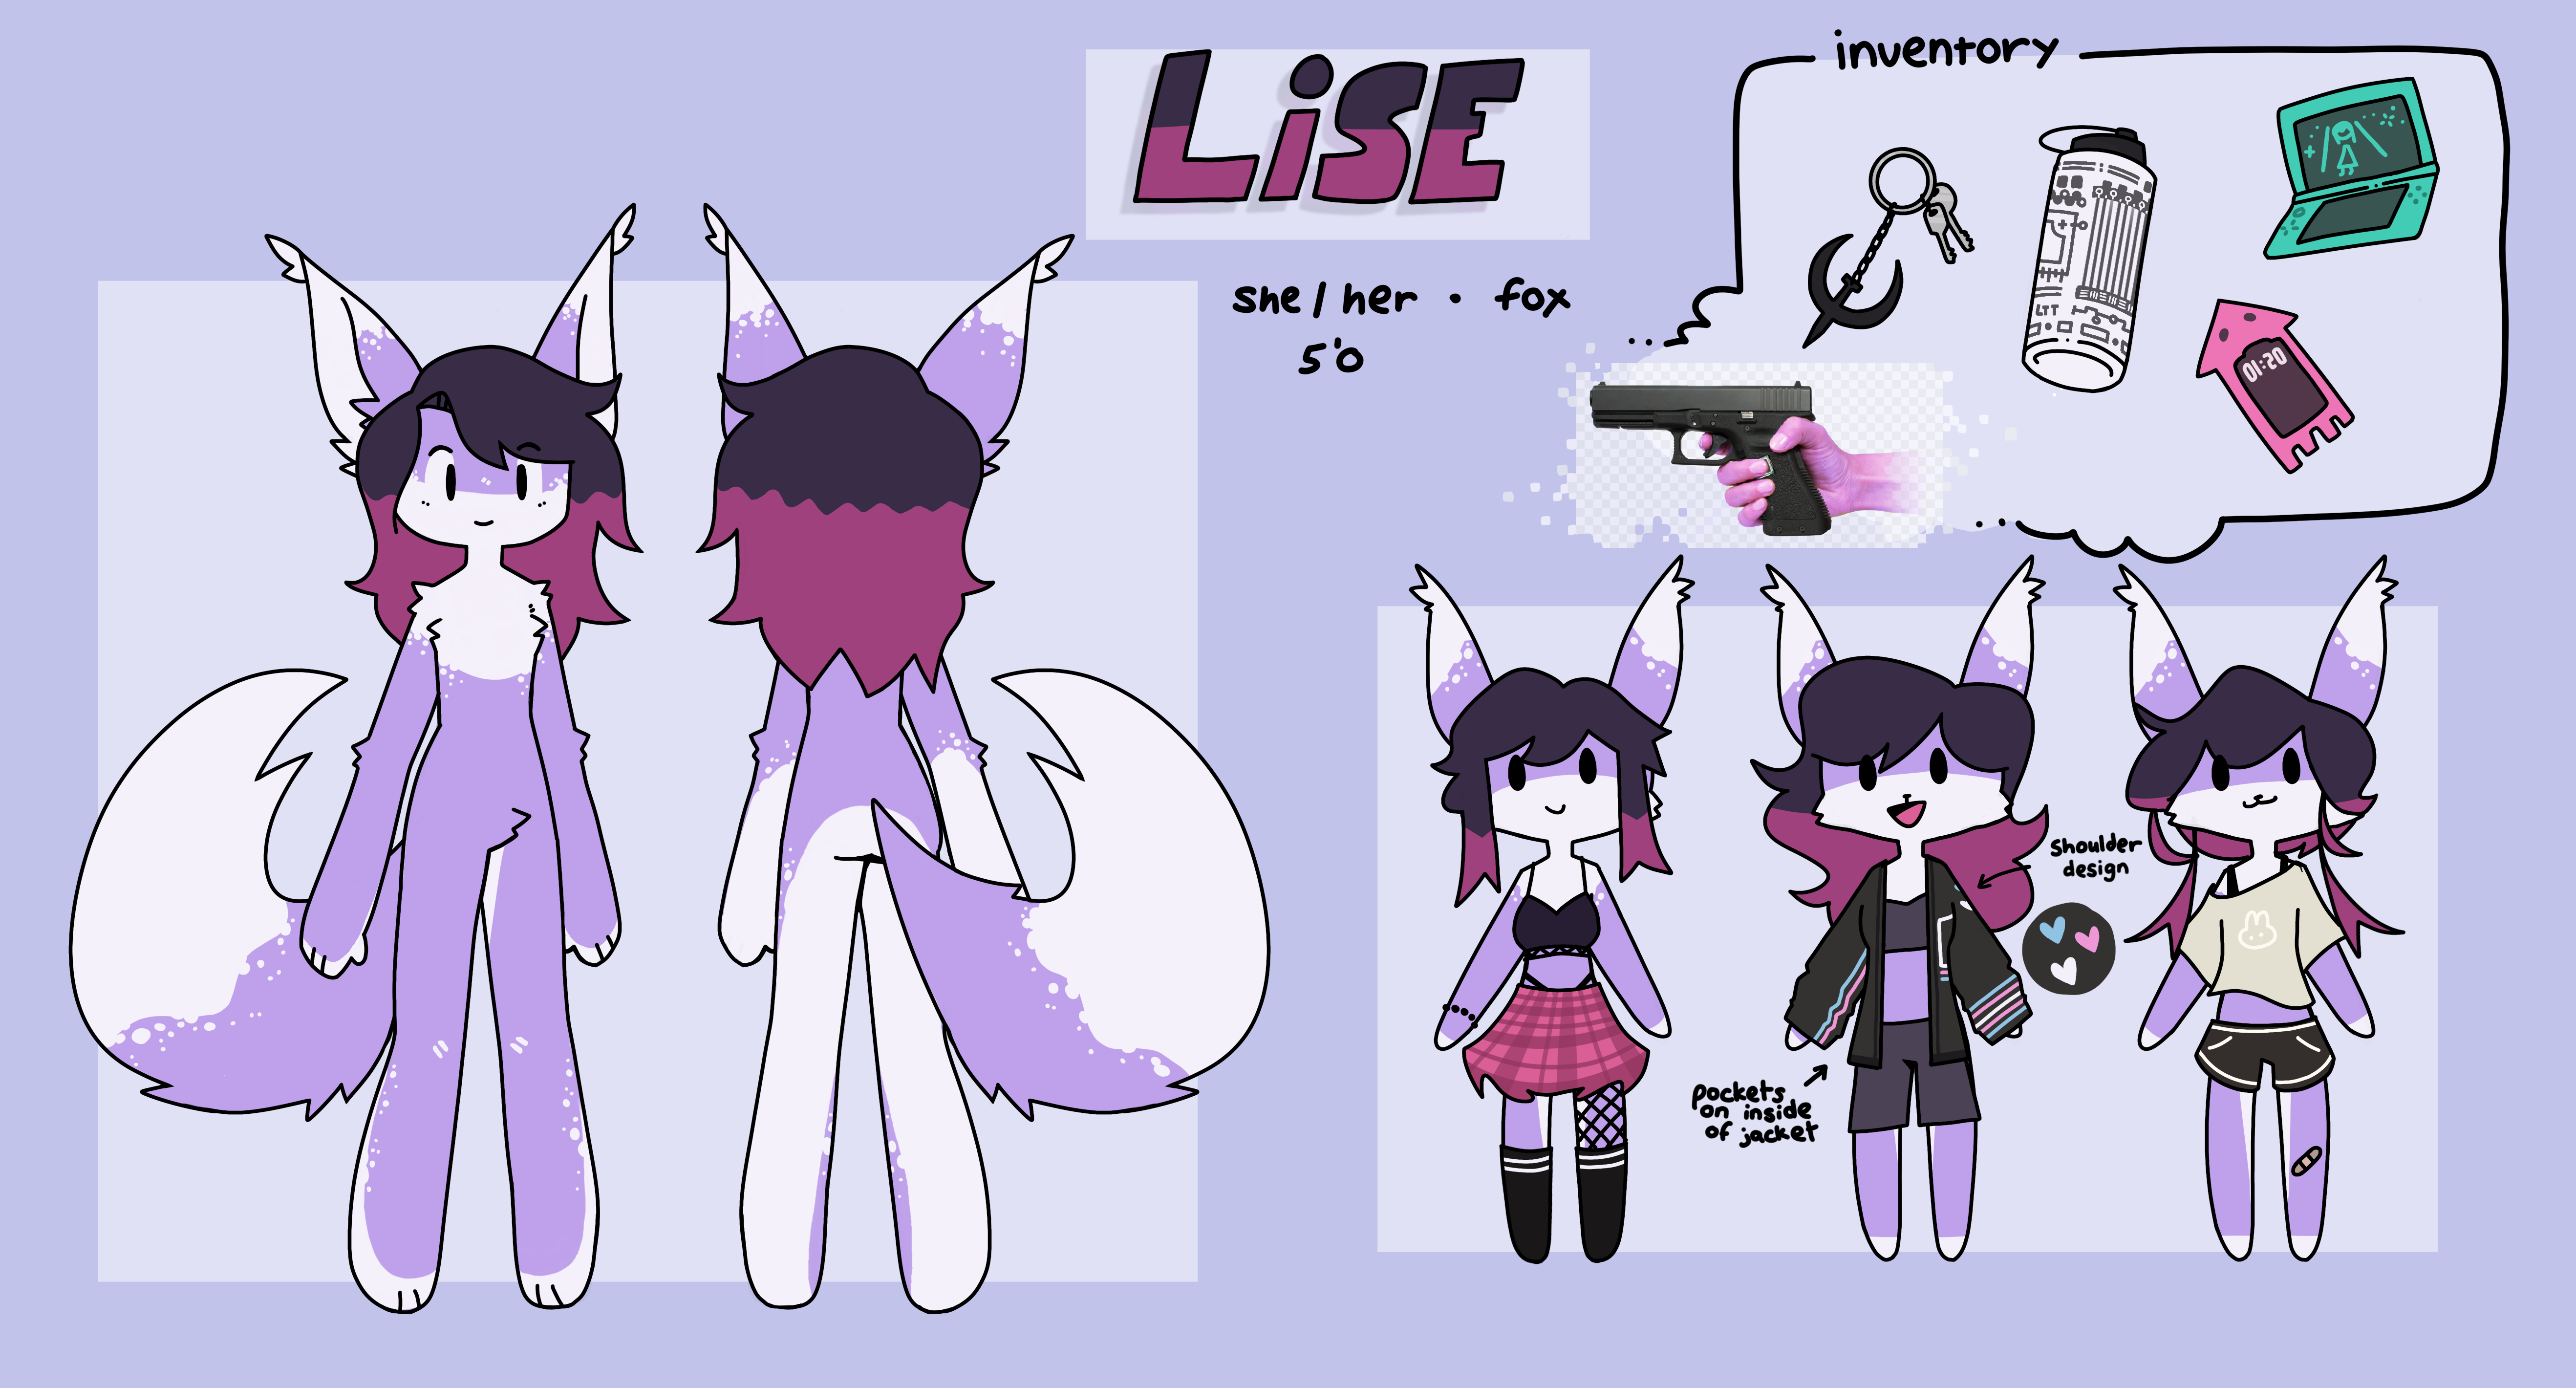 a reference sheet for my fursona. on the top middle is the text 'Lise' in big pink/purple letters, with the text 'she/her - fox (line break) 5'0'. on the left is two large drawings of her, in a neutral pose, front and back facing. on the bottom right are three smaller chibi drawings of her. the leftmost is her in a dark crop top with spaghetti straps, a pink plaid knee-length skirt with visible panty strings coming out the top, fishnets on her left leg (viewer's right), and knee high black socks with white strips. she also has a simple bead bracelet. the middle outfit has her in the original outfit she wore, the black jacket with trans colors, dark crop top and shorts, and text specifying there are pockets inside, and the shoulder trans hearts design. the right design is a more casual fit, with a loose t-shirt, visible dark bra straps, and booty shorts. in the top right there is an inventory of items, containting keys on a quake keychain, a black and white LTT store water bottle, a blue 3ds, a pink splatoon styled phone case, and a photo of a hand holding a glock 19. the photo still has the PNG transparent background, and the hand has been edited to be pink